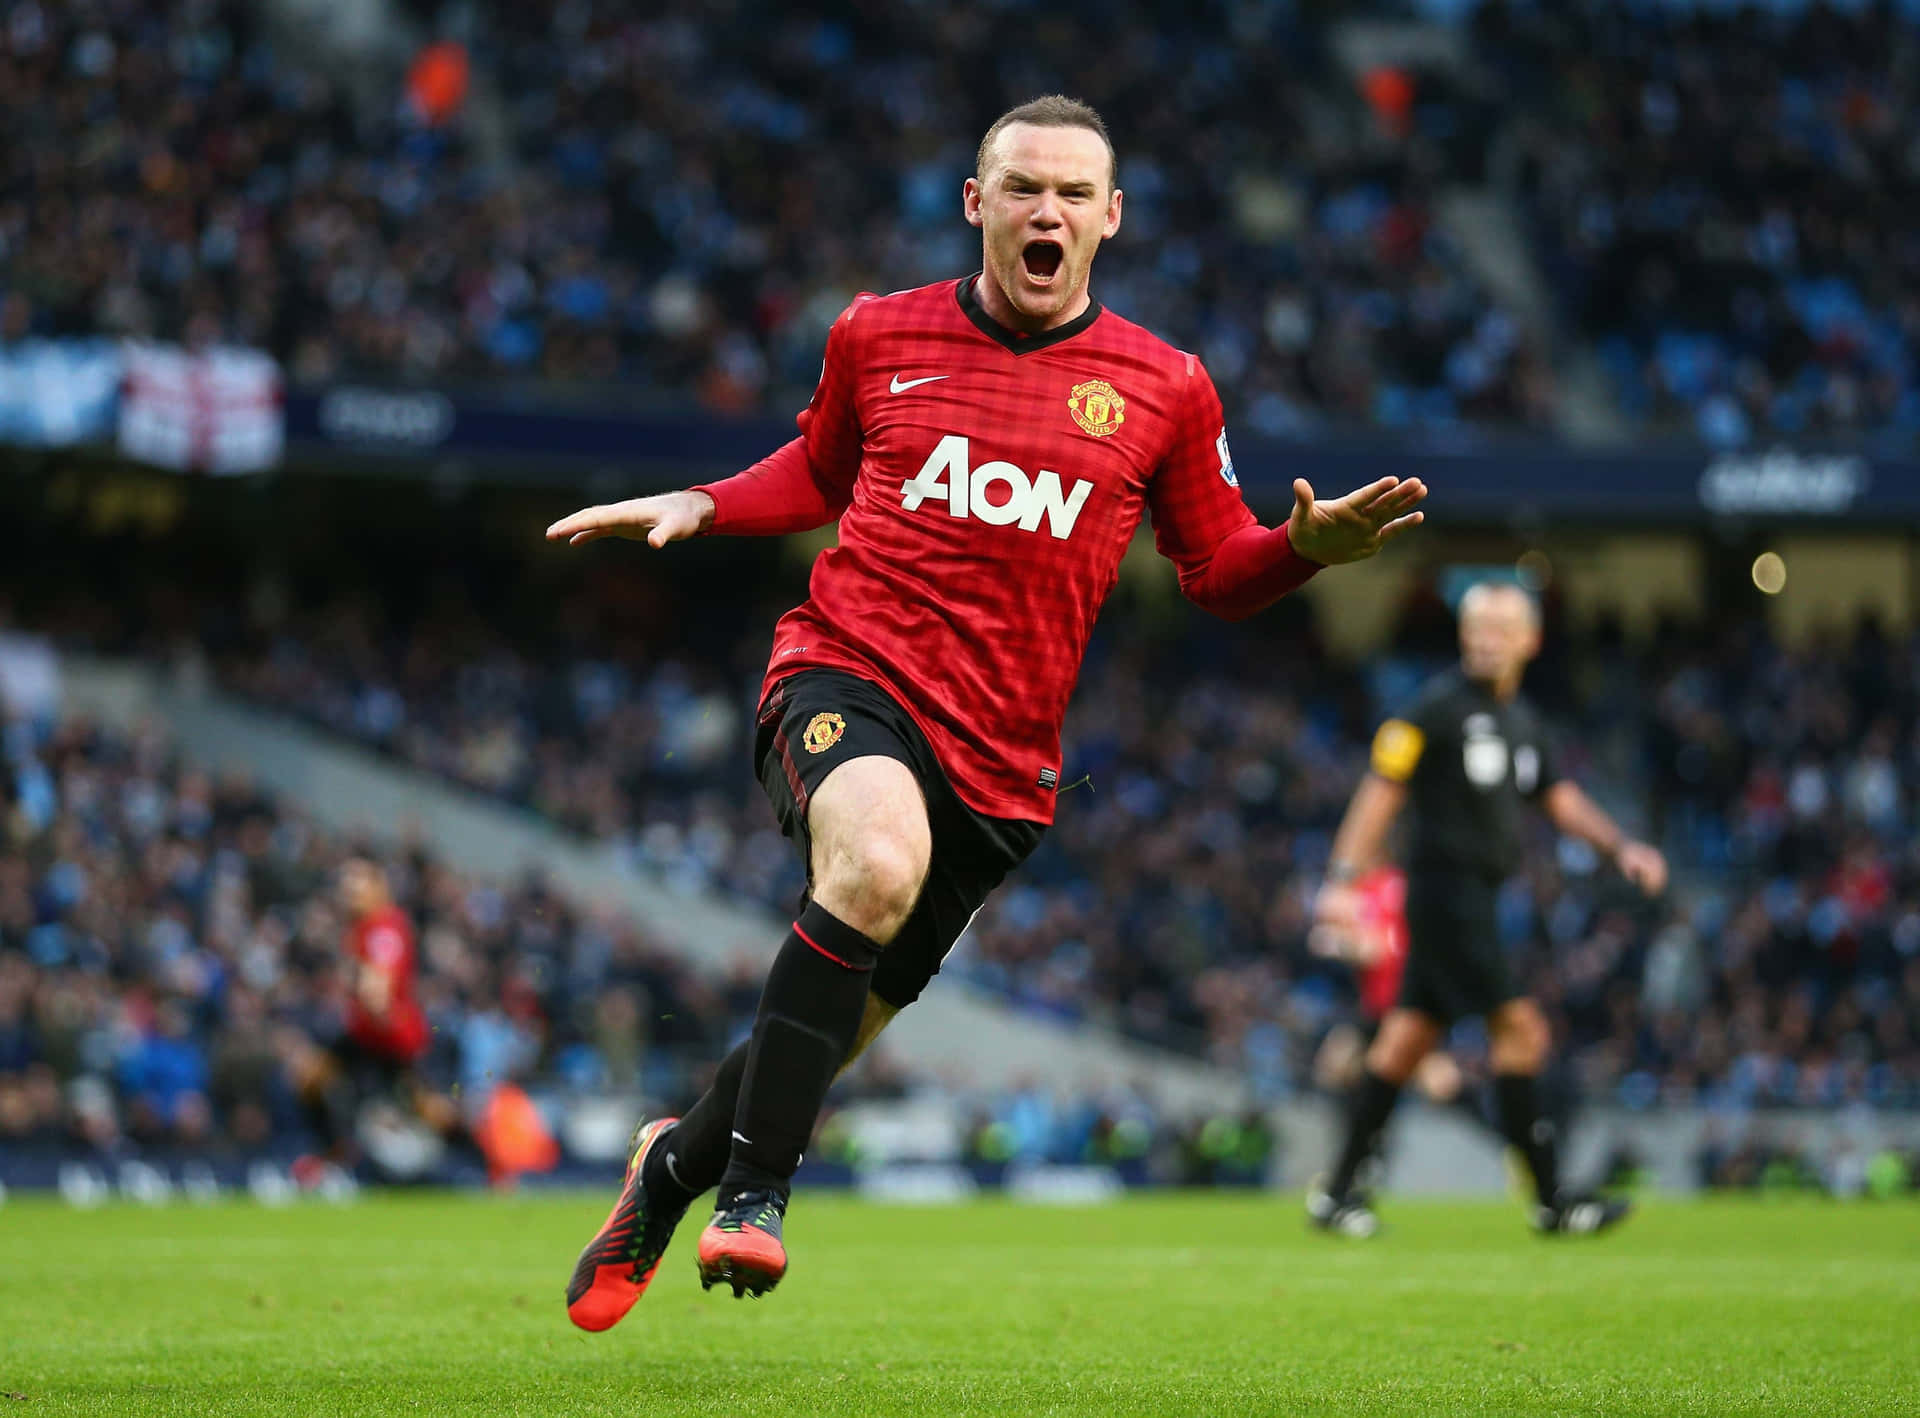 Wayne Rooney in Action on the Soccer Field